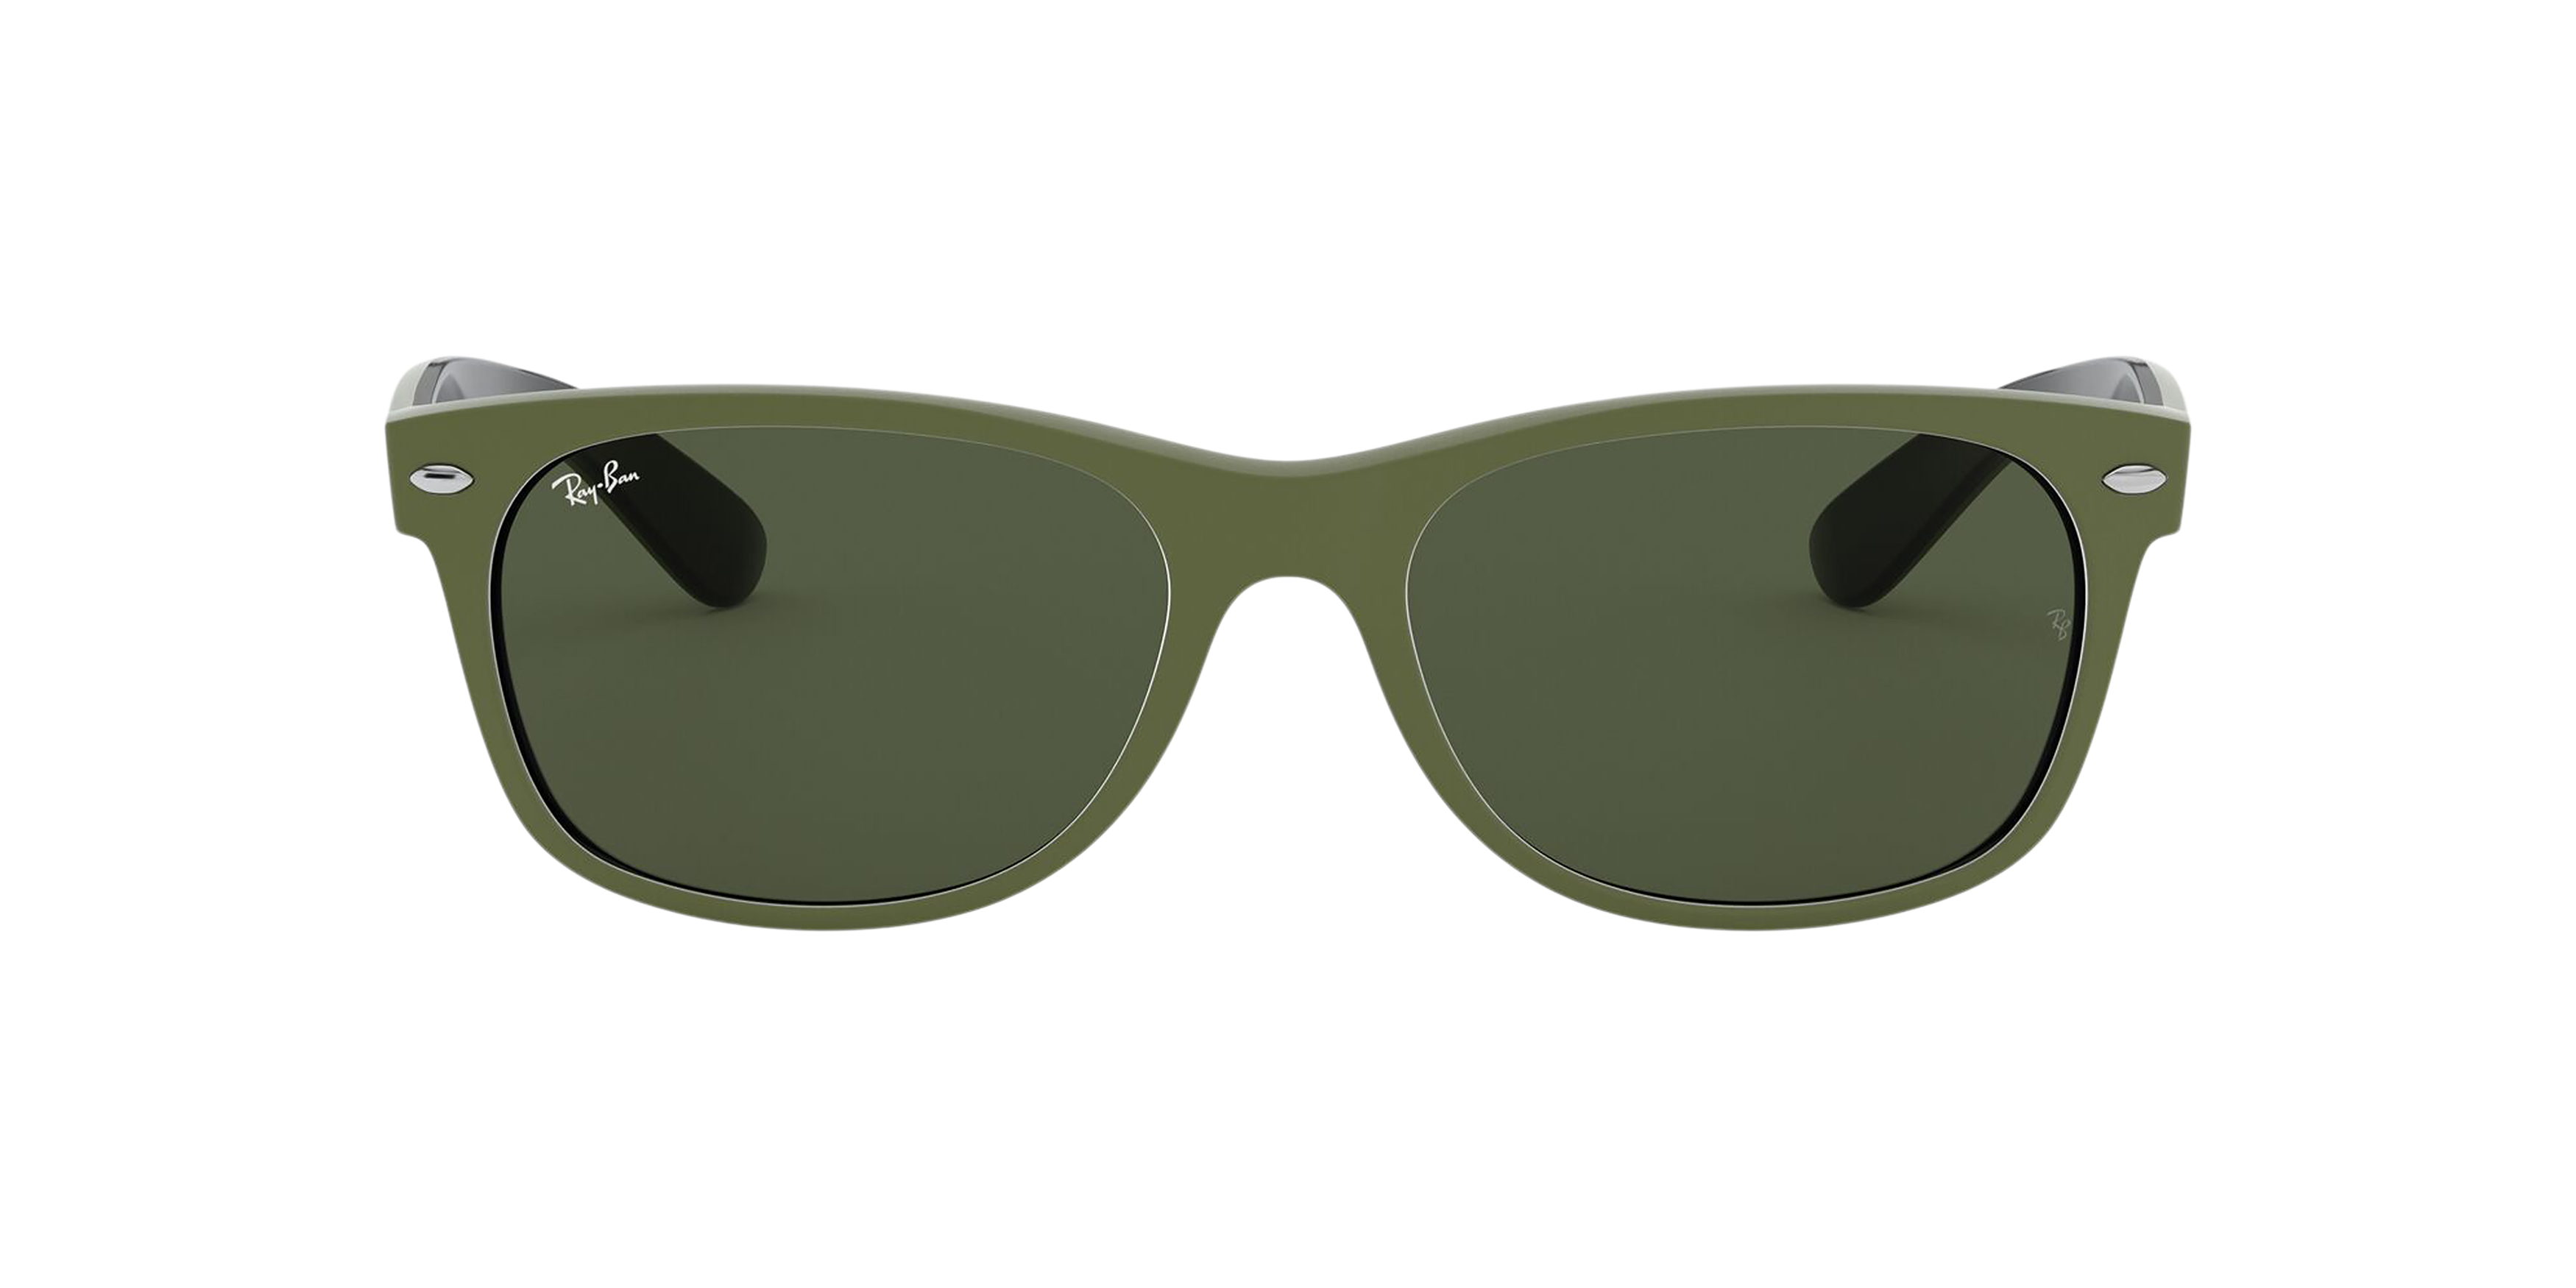 [products.image.front] Ray-Ban New Wayfarer Color Mix RB2132 646531